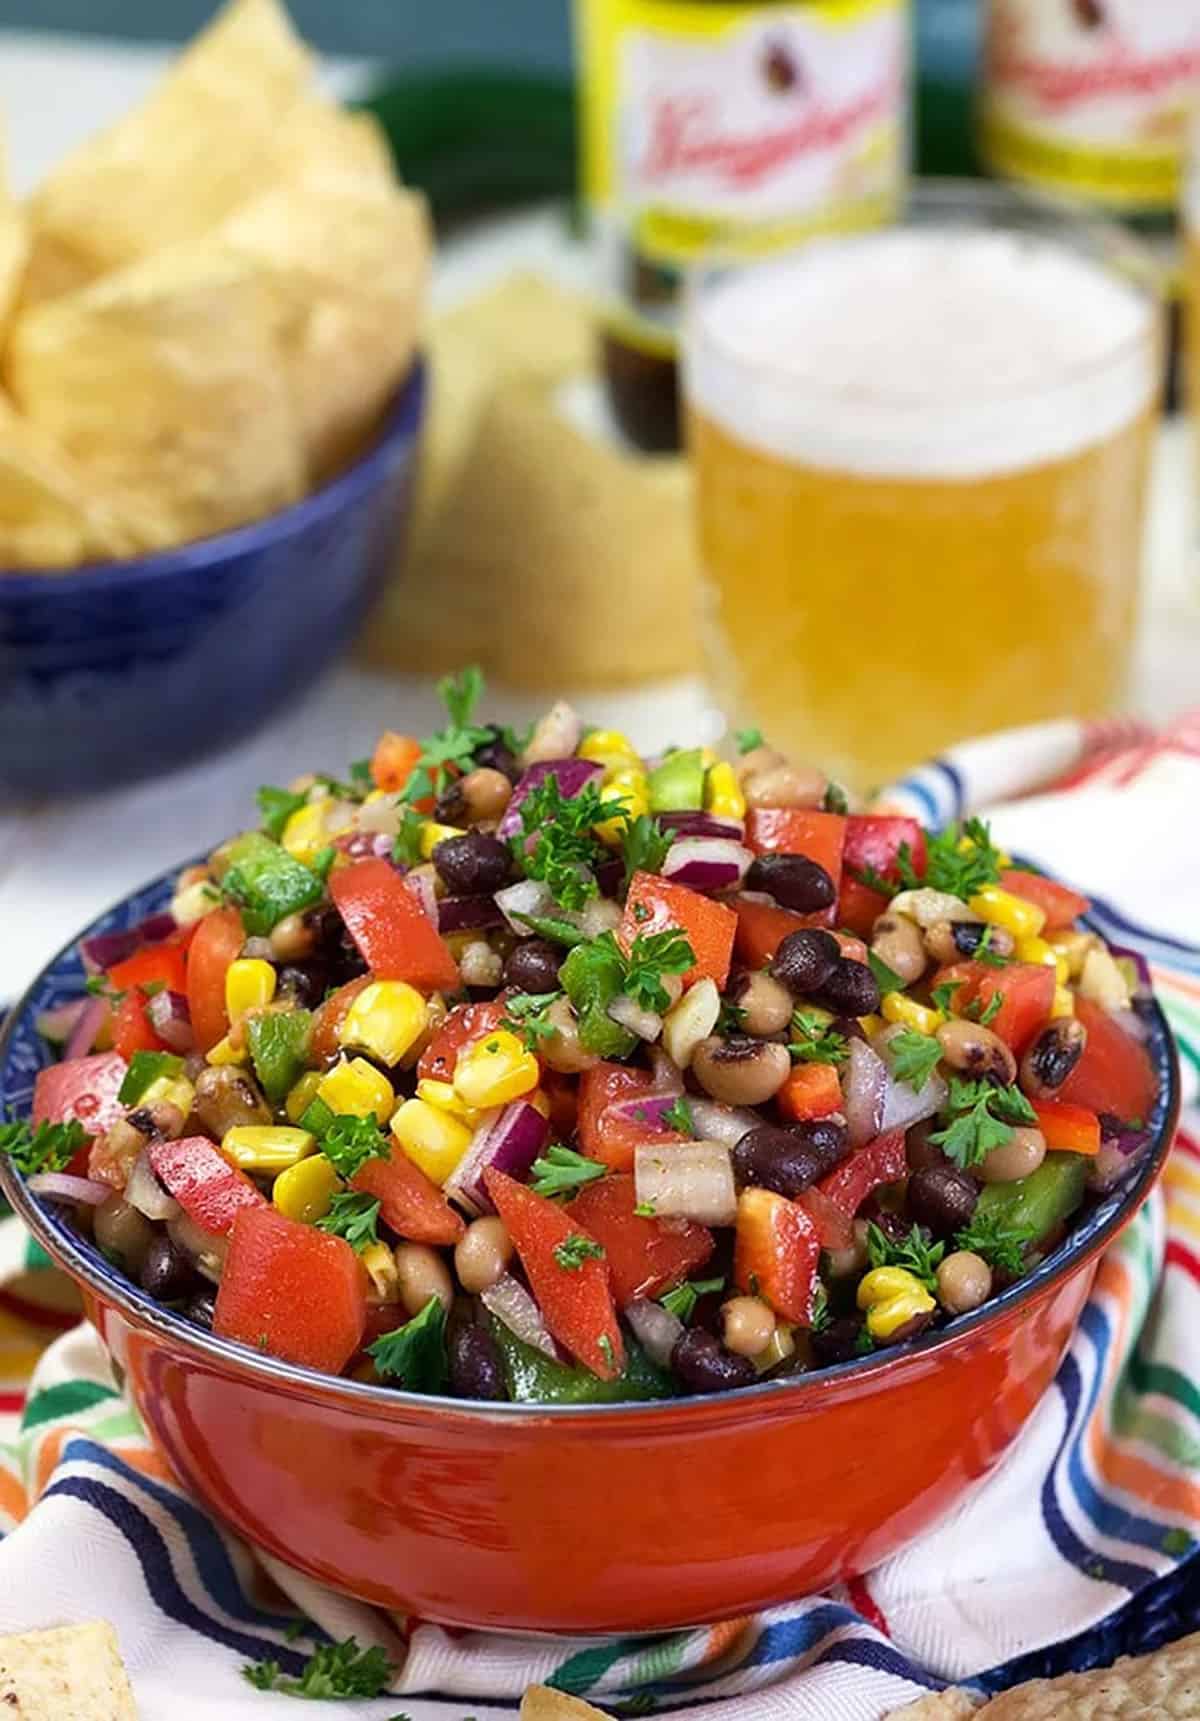 Texas caviar in a red bowl with jalapeños in the background.